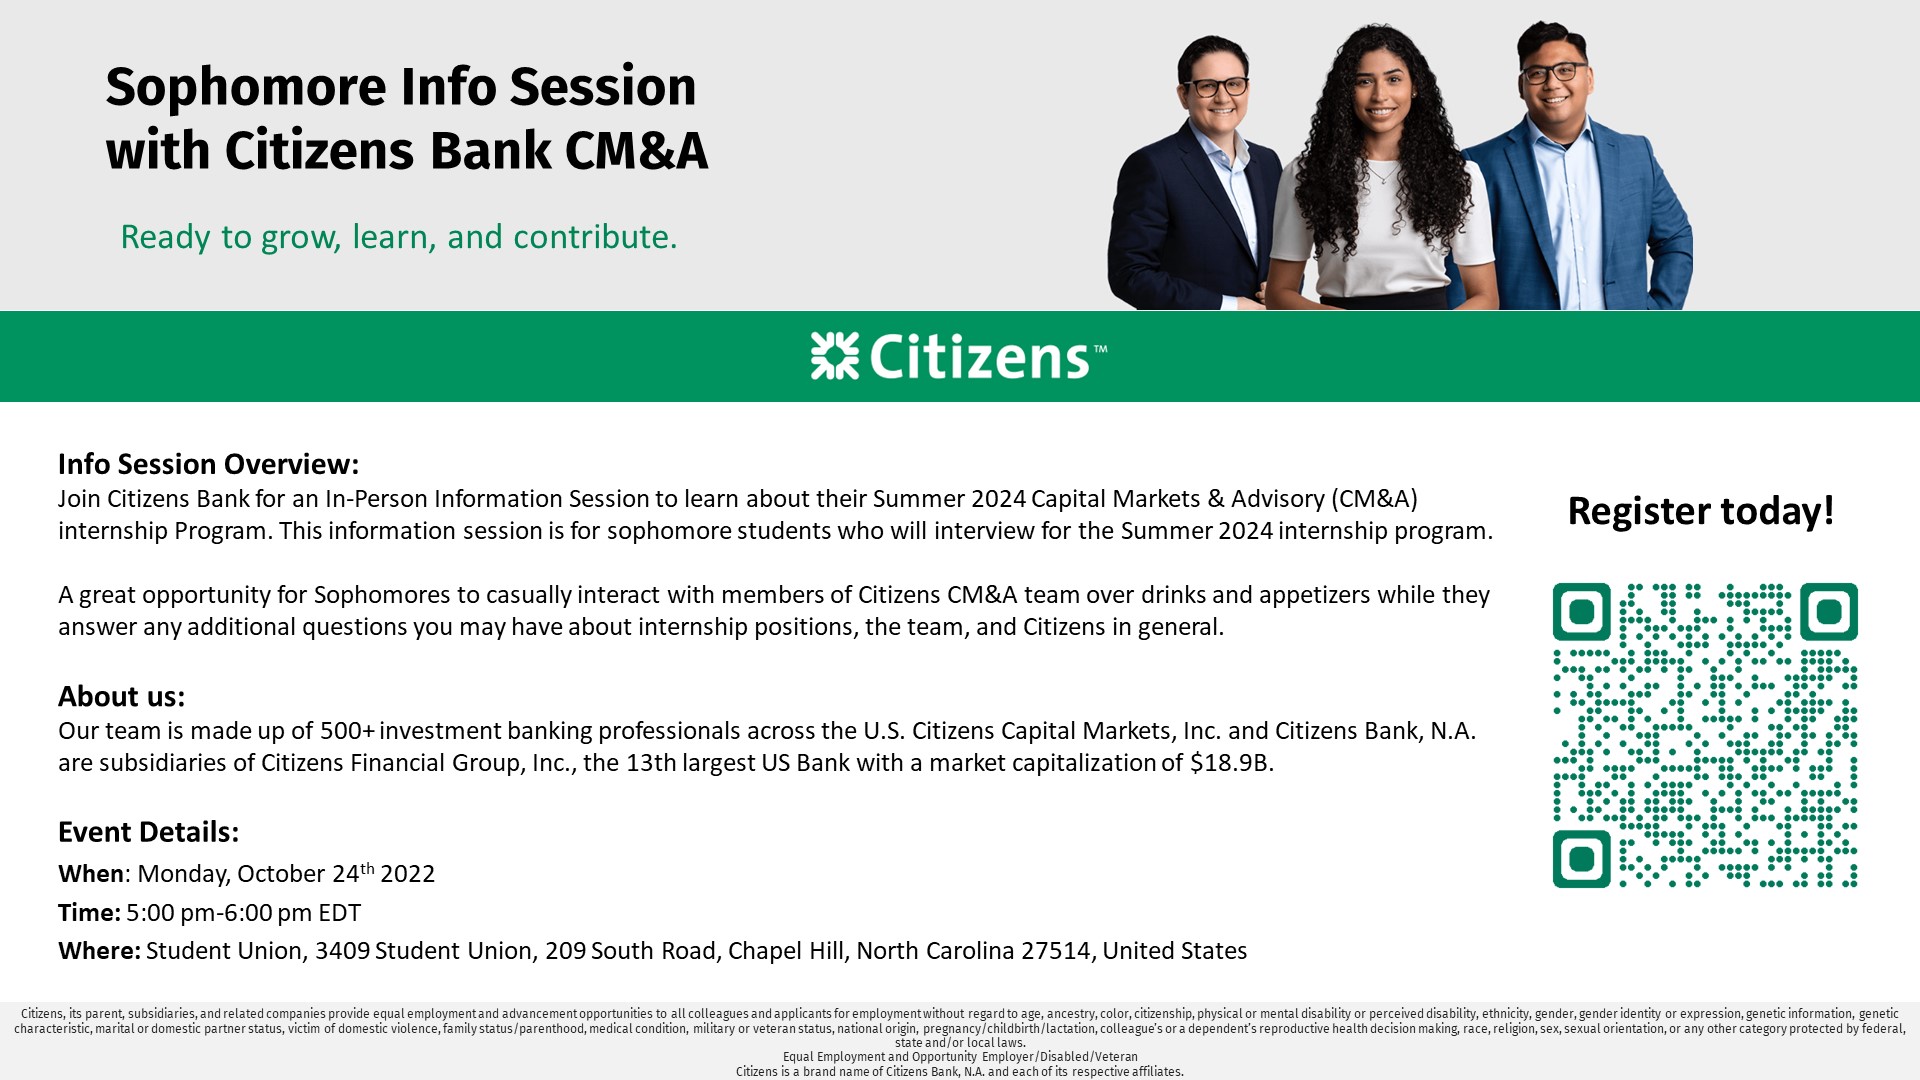 Information session flyer for Citizens Bank